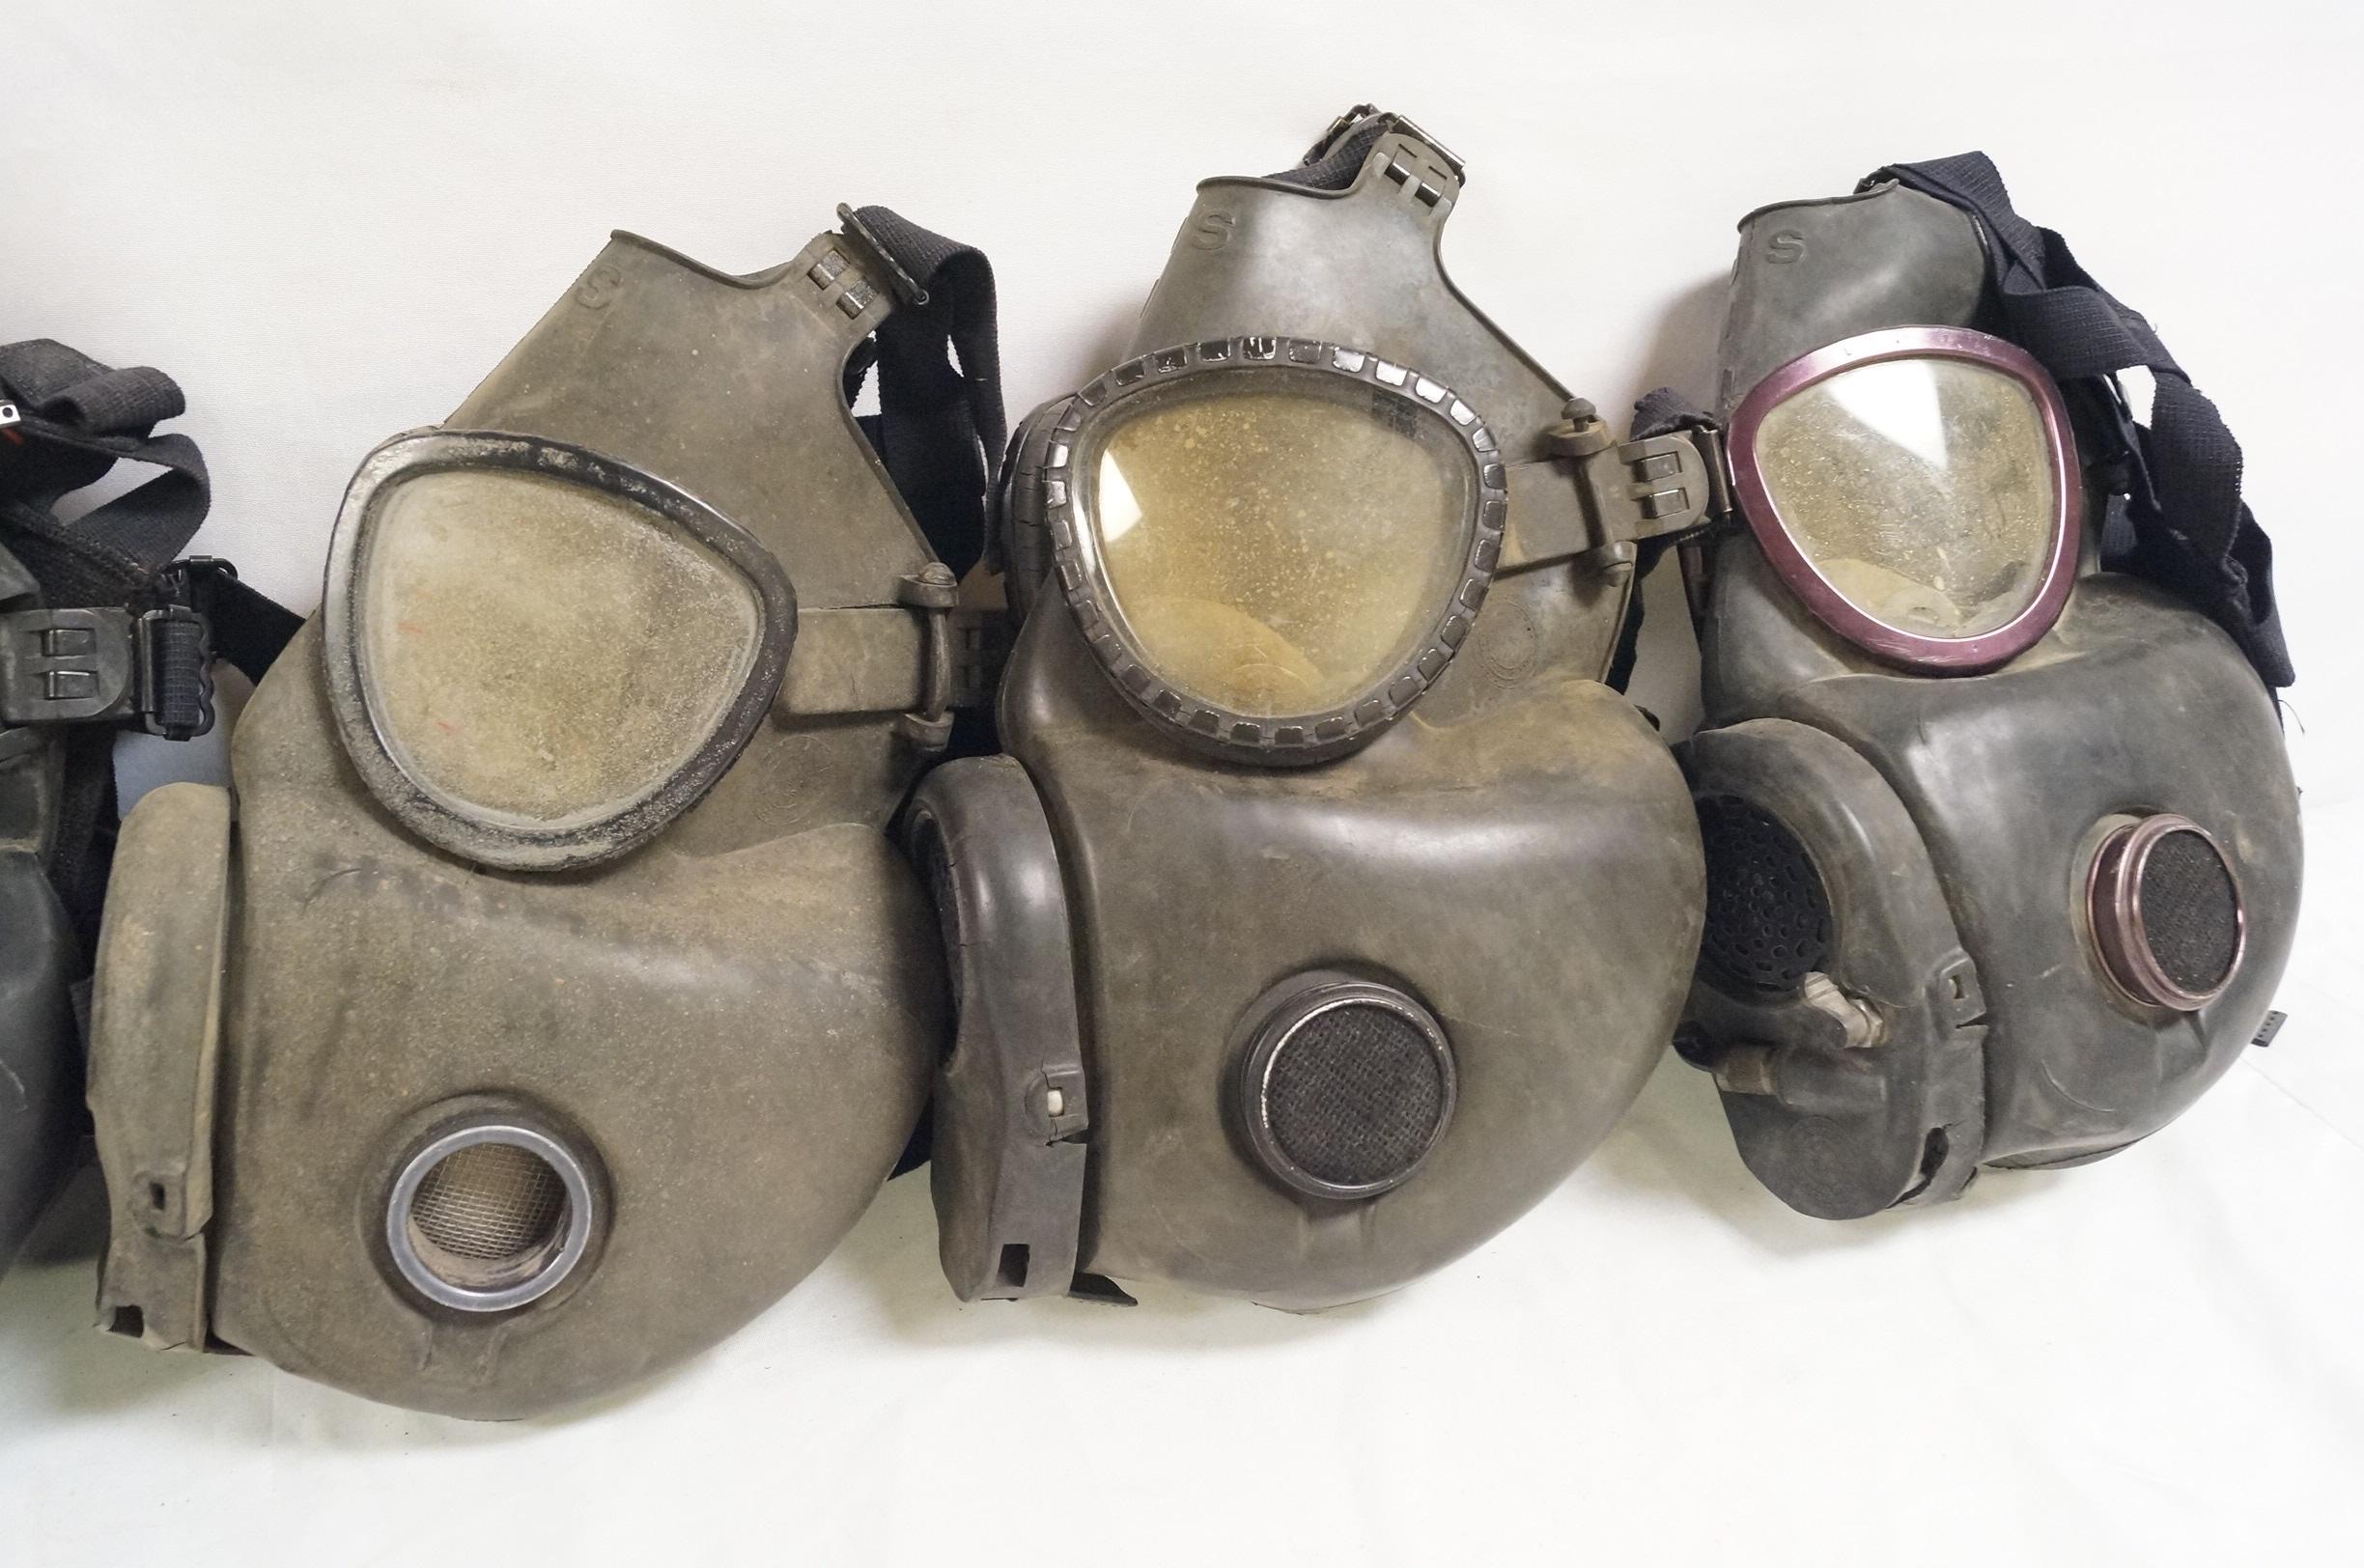 3 US M17 and 2 M17A1 & A2 Gas Masks